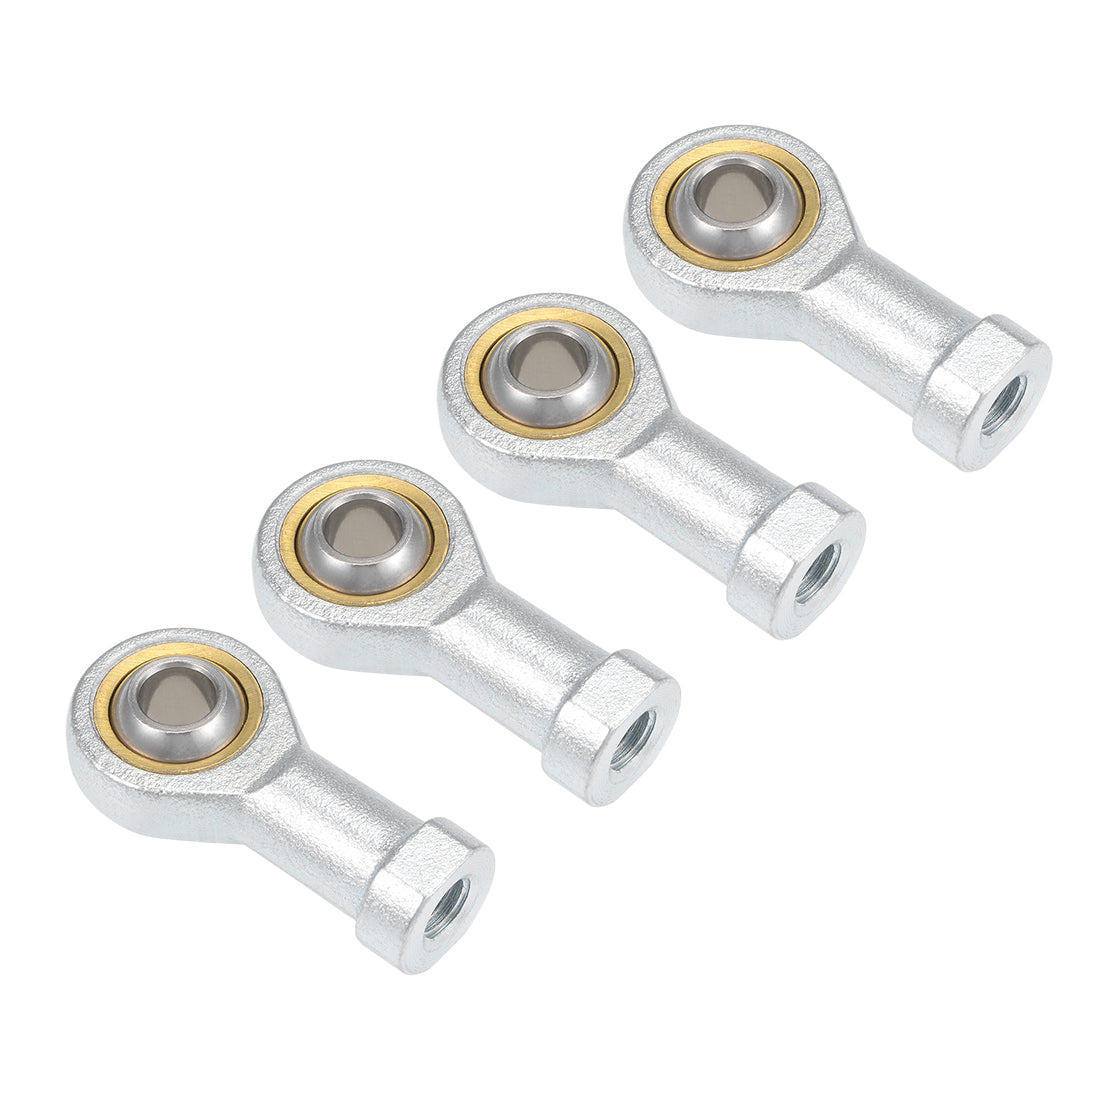 uxcell Uxcell 8mm Rod End Bearing M8x1.25mm Rod Ends Ball Joint Female Right Hand Thread 4pcs